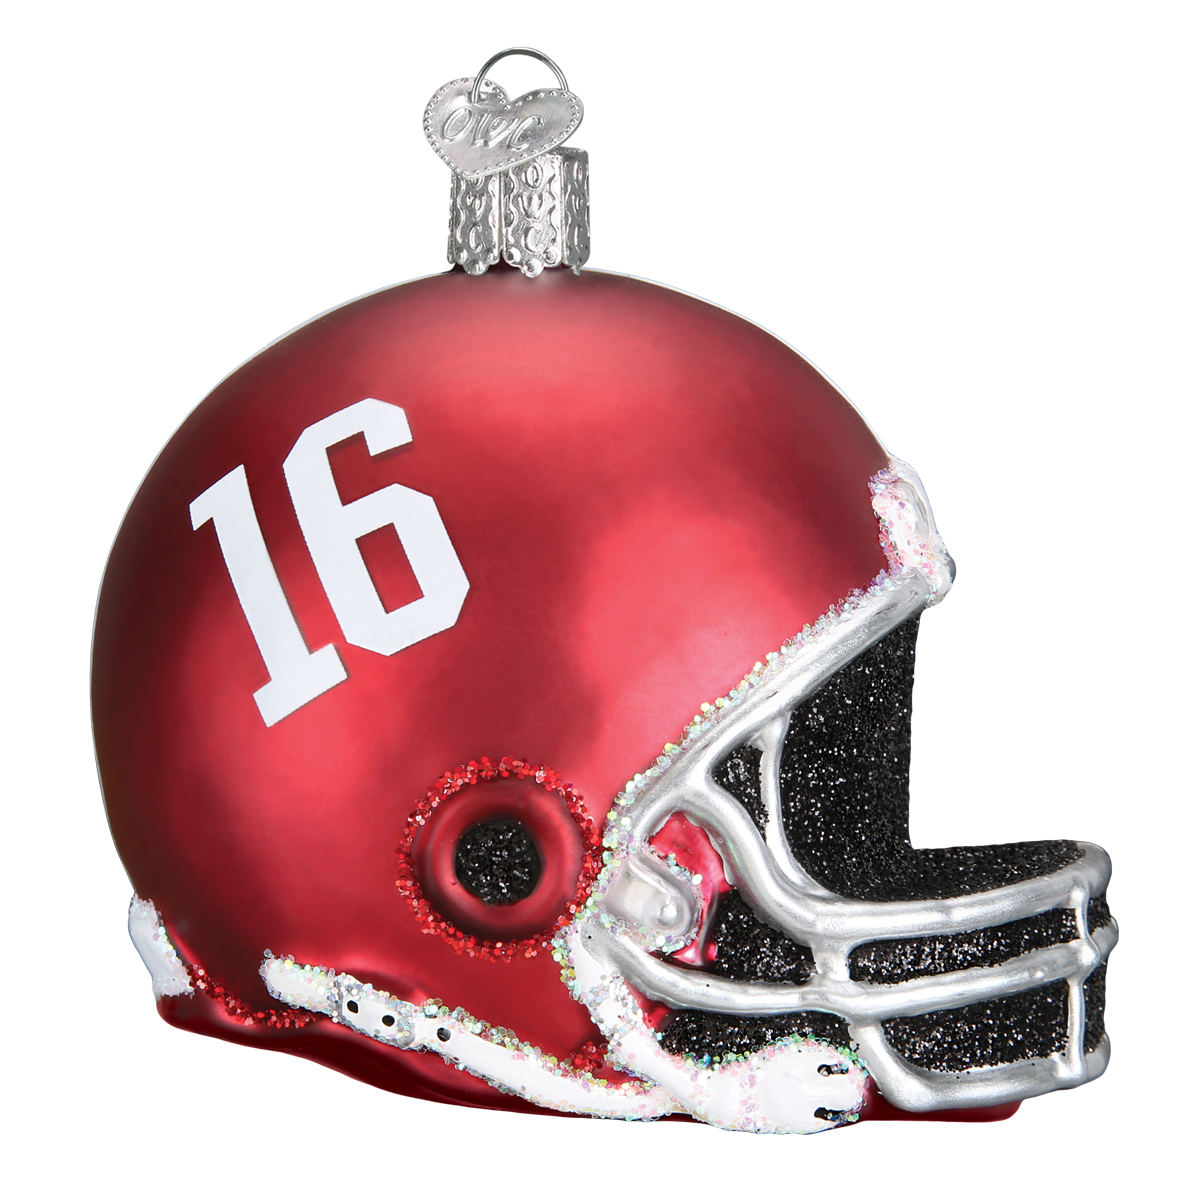 Roll Tide! Christmas Ornaments for Alabama Fans!